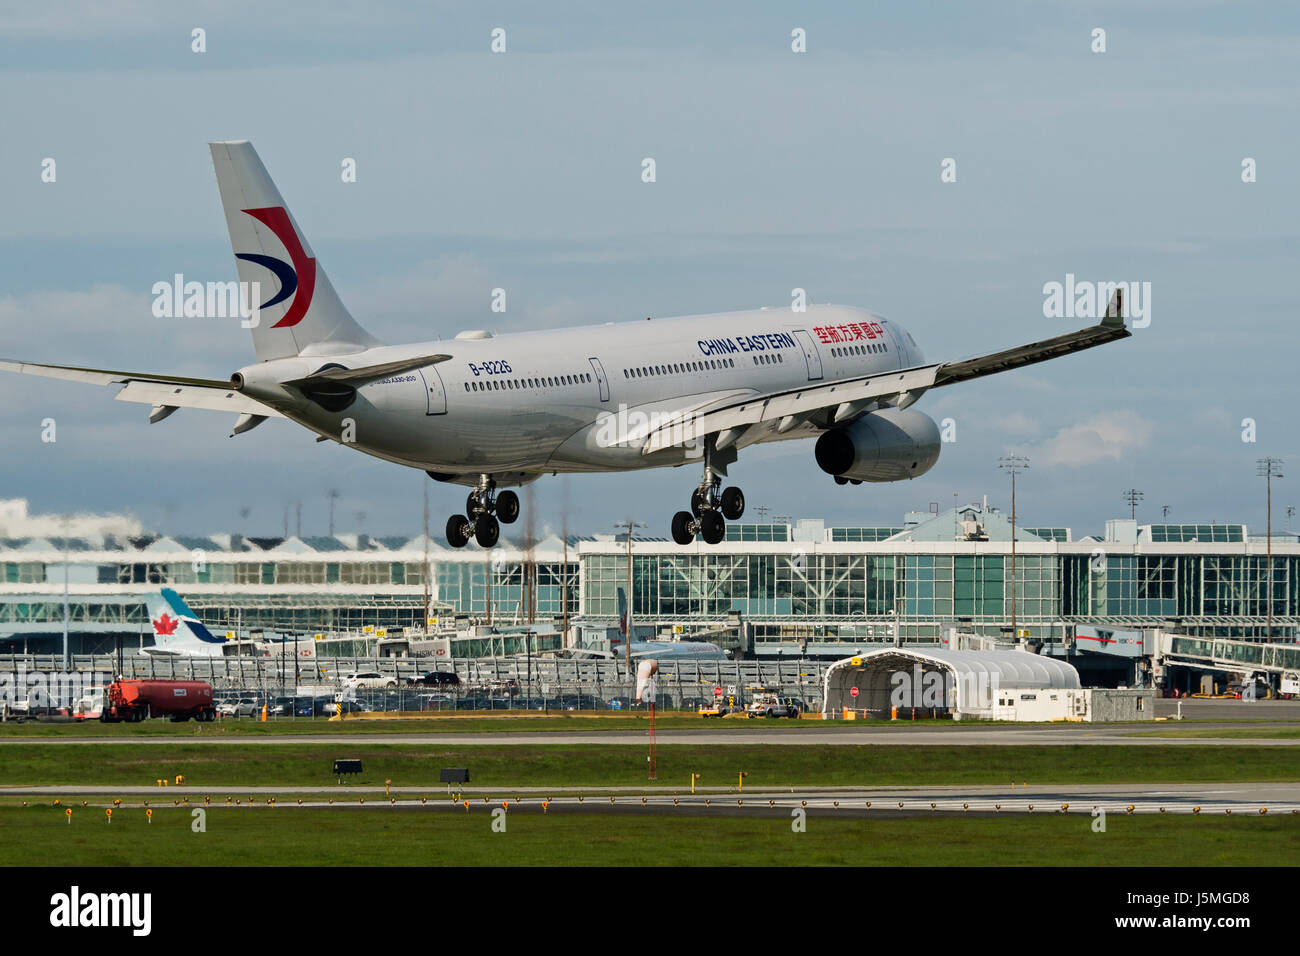 China Eastern Airlines plane airplane landing Vancouver International Airport terminal exterior view Airbus A330 jetliner Stock Photo